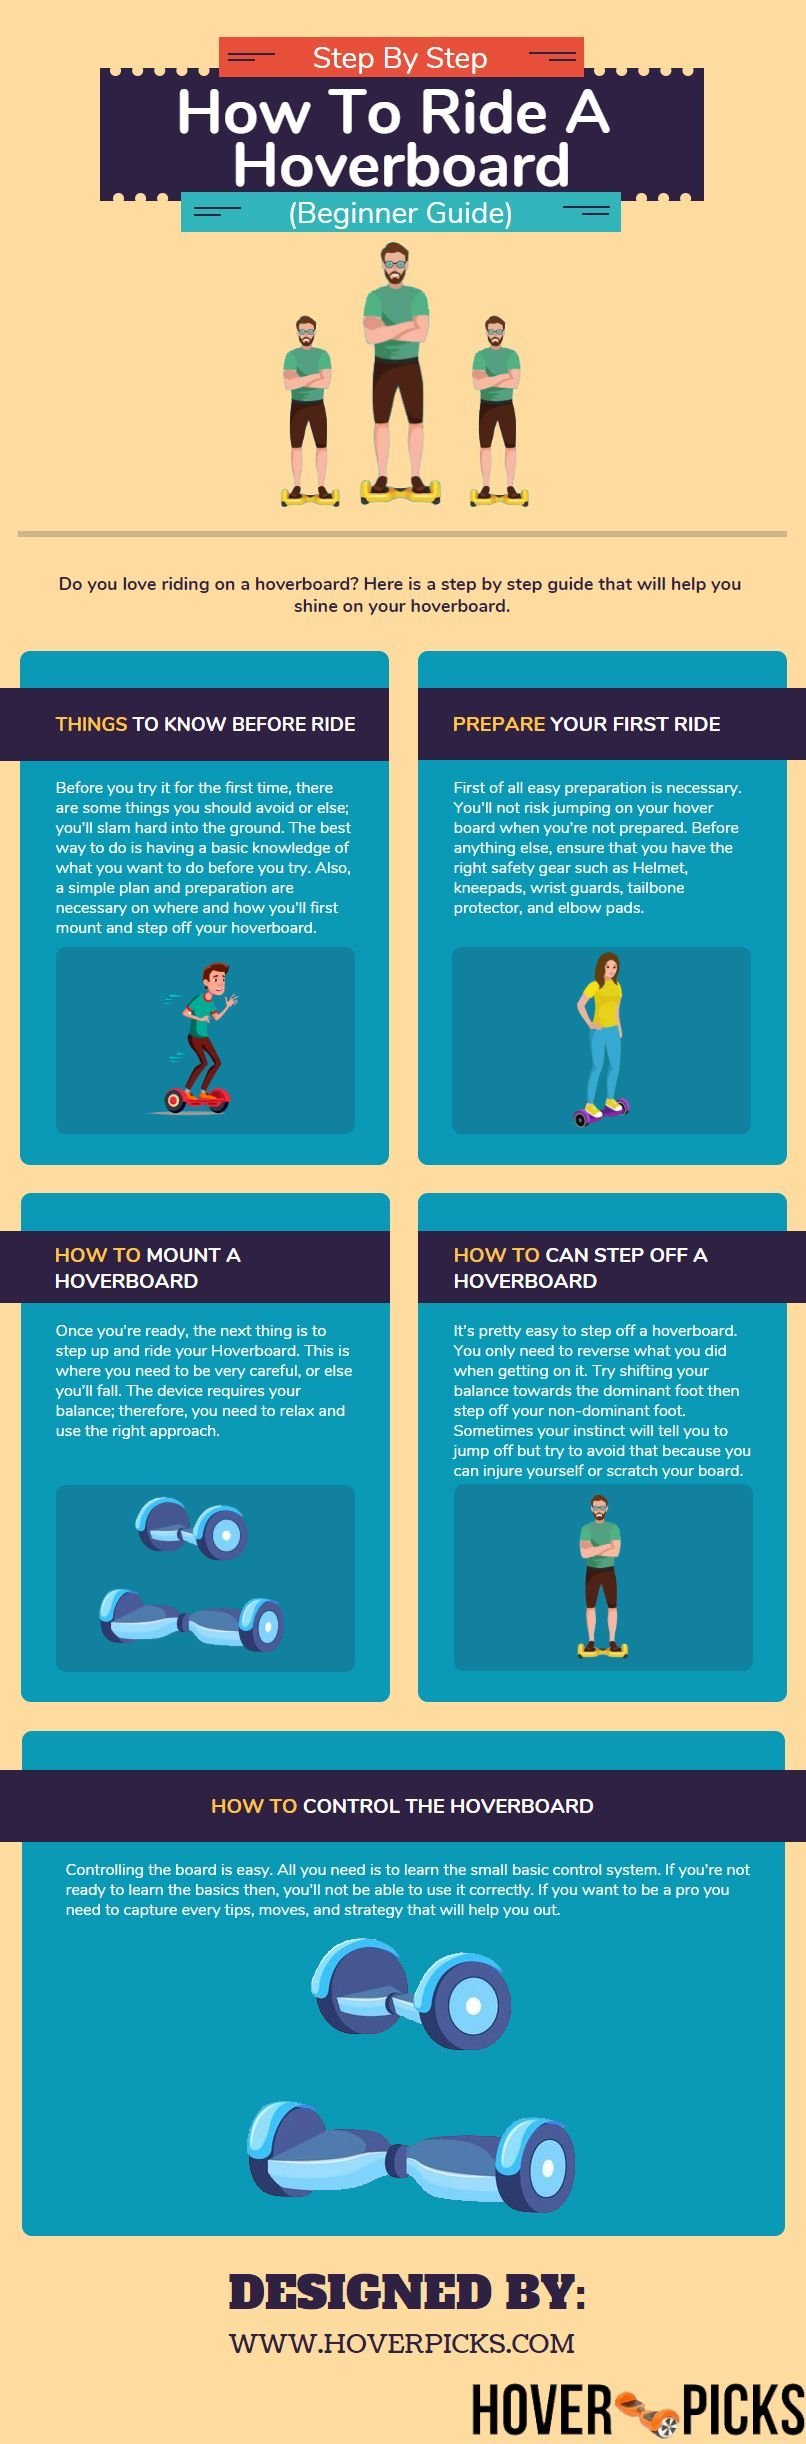 How To Ride A Hoverboard Infographic